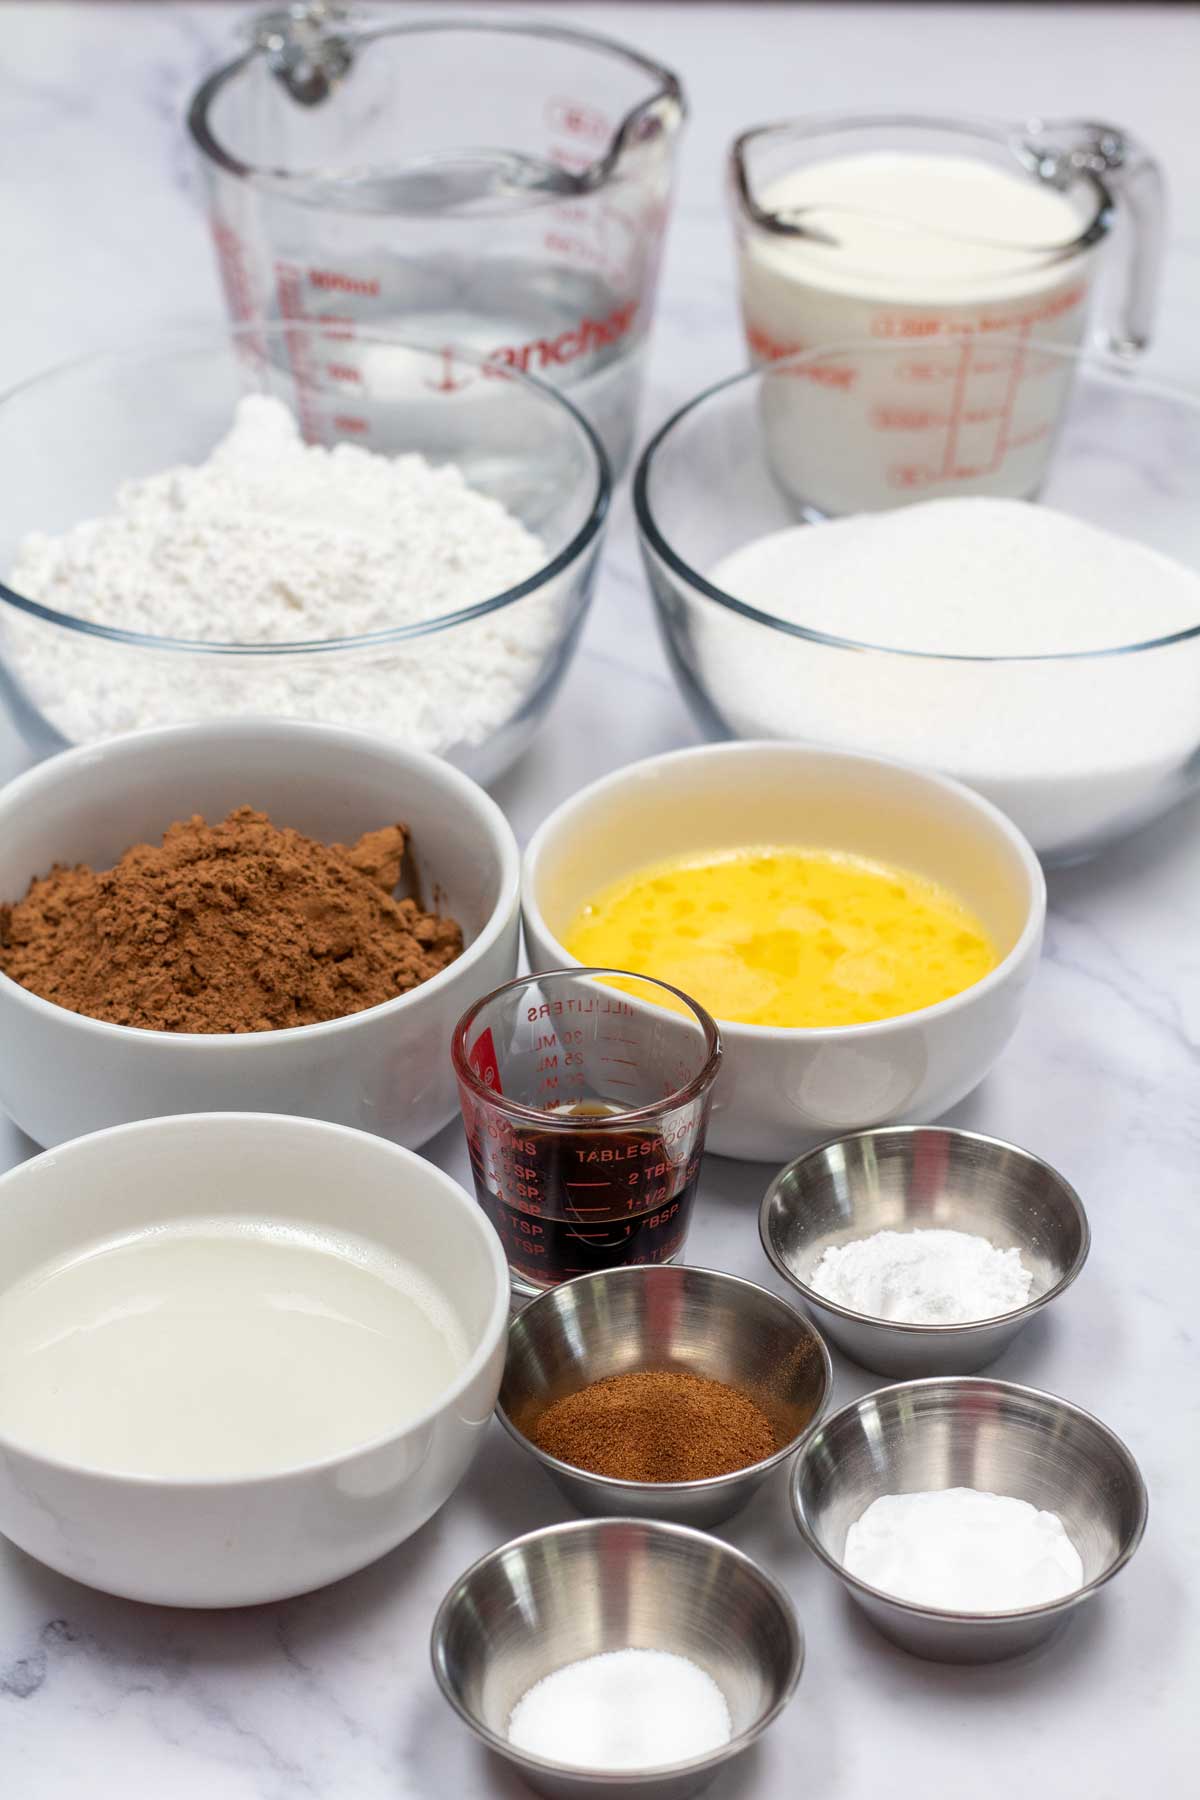 Tall image showing ingredients needed for chocolate cake.